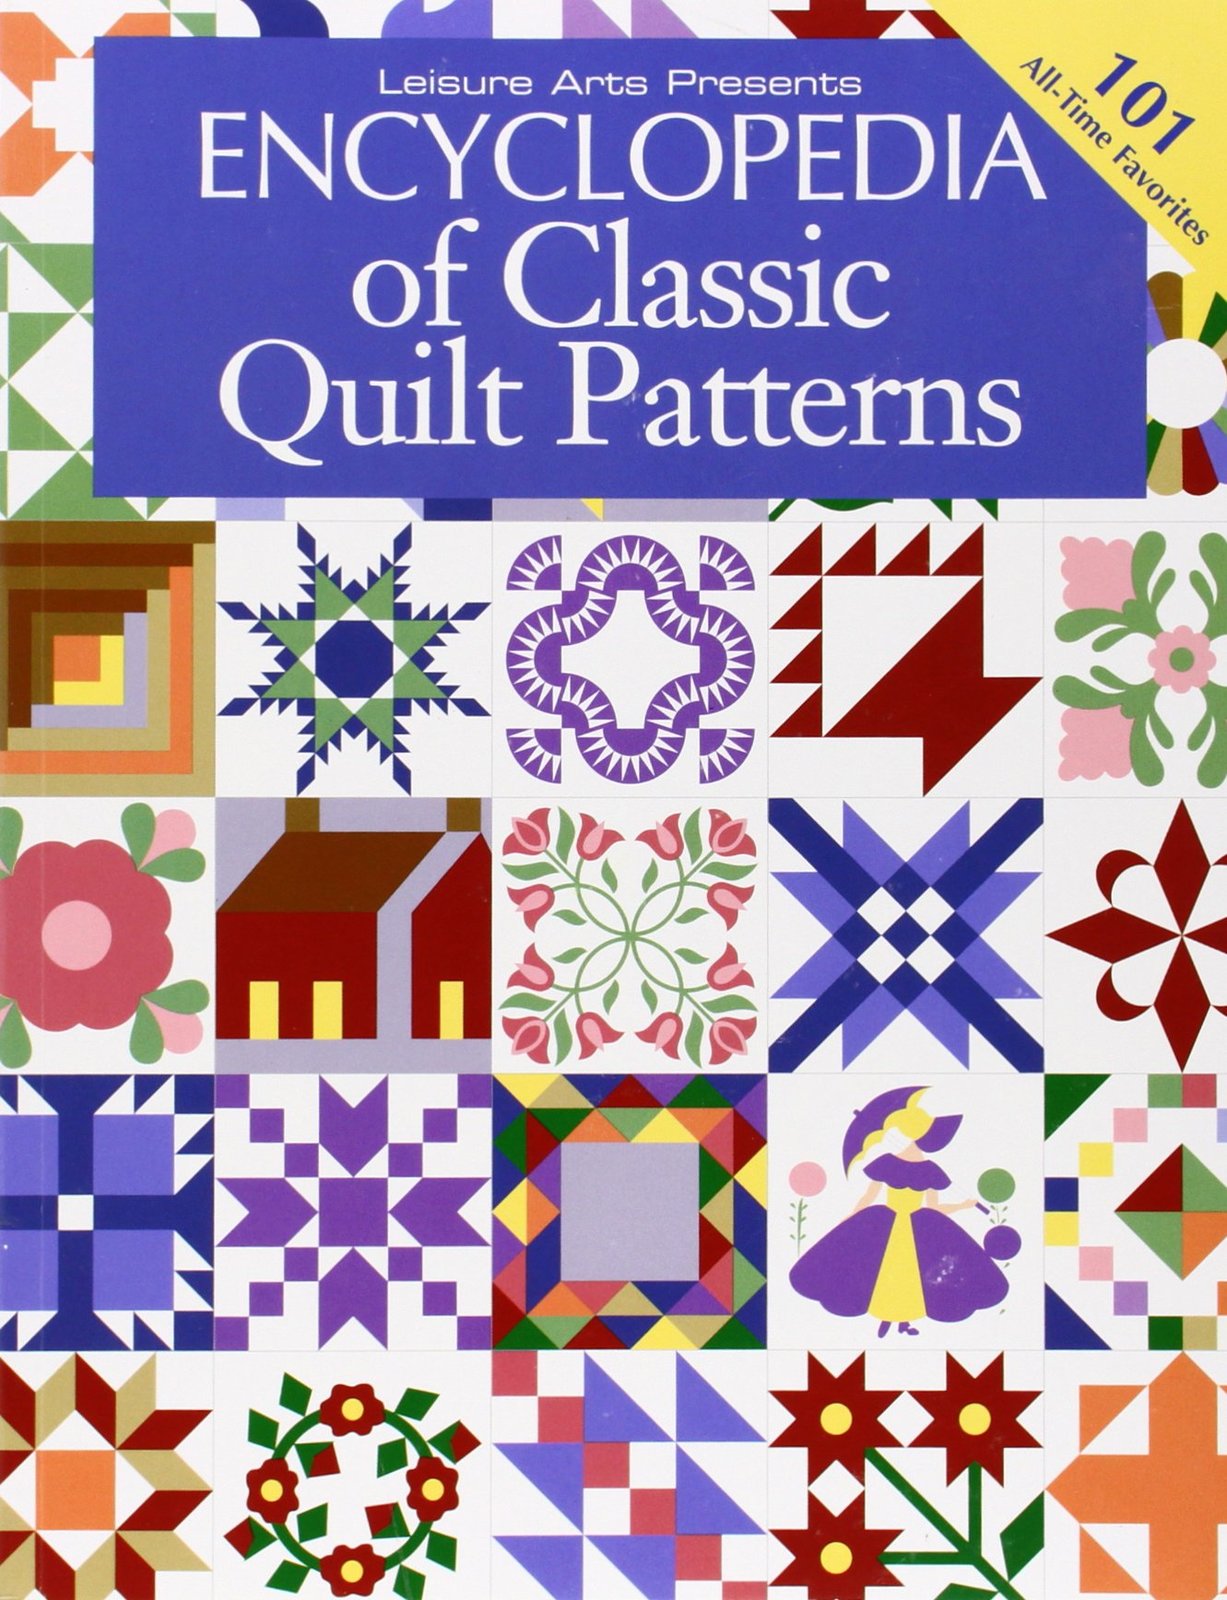 Leisure Arts EncyclopediaClassic Quilt Patterns Bk Wilens, Patricia and Leisure  - $12.99